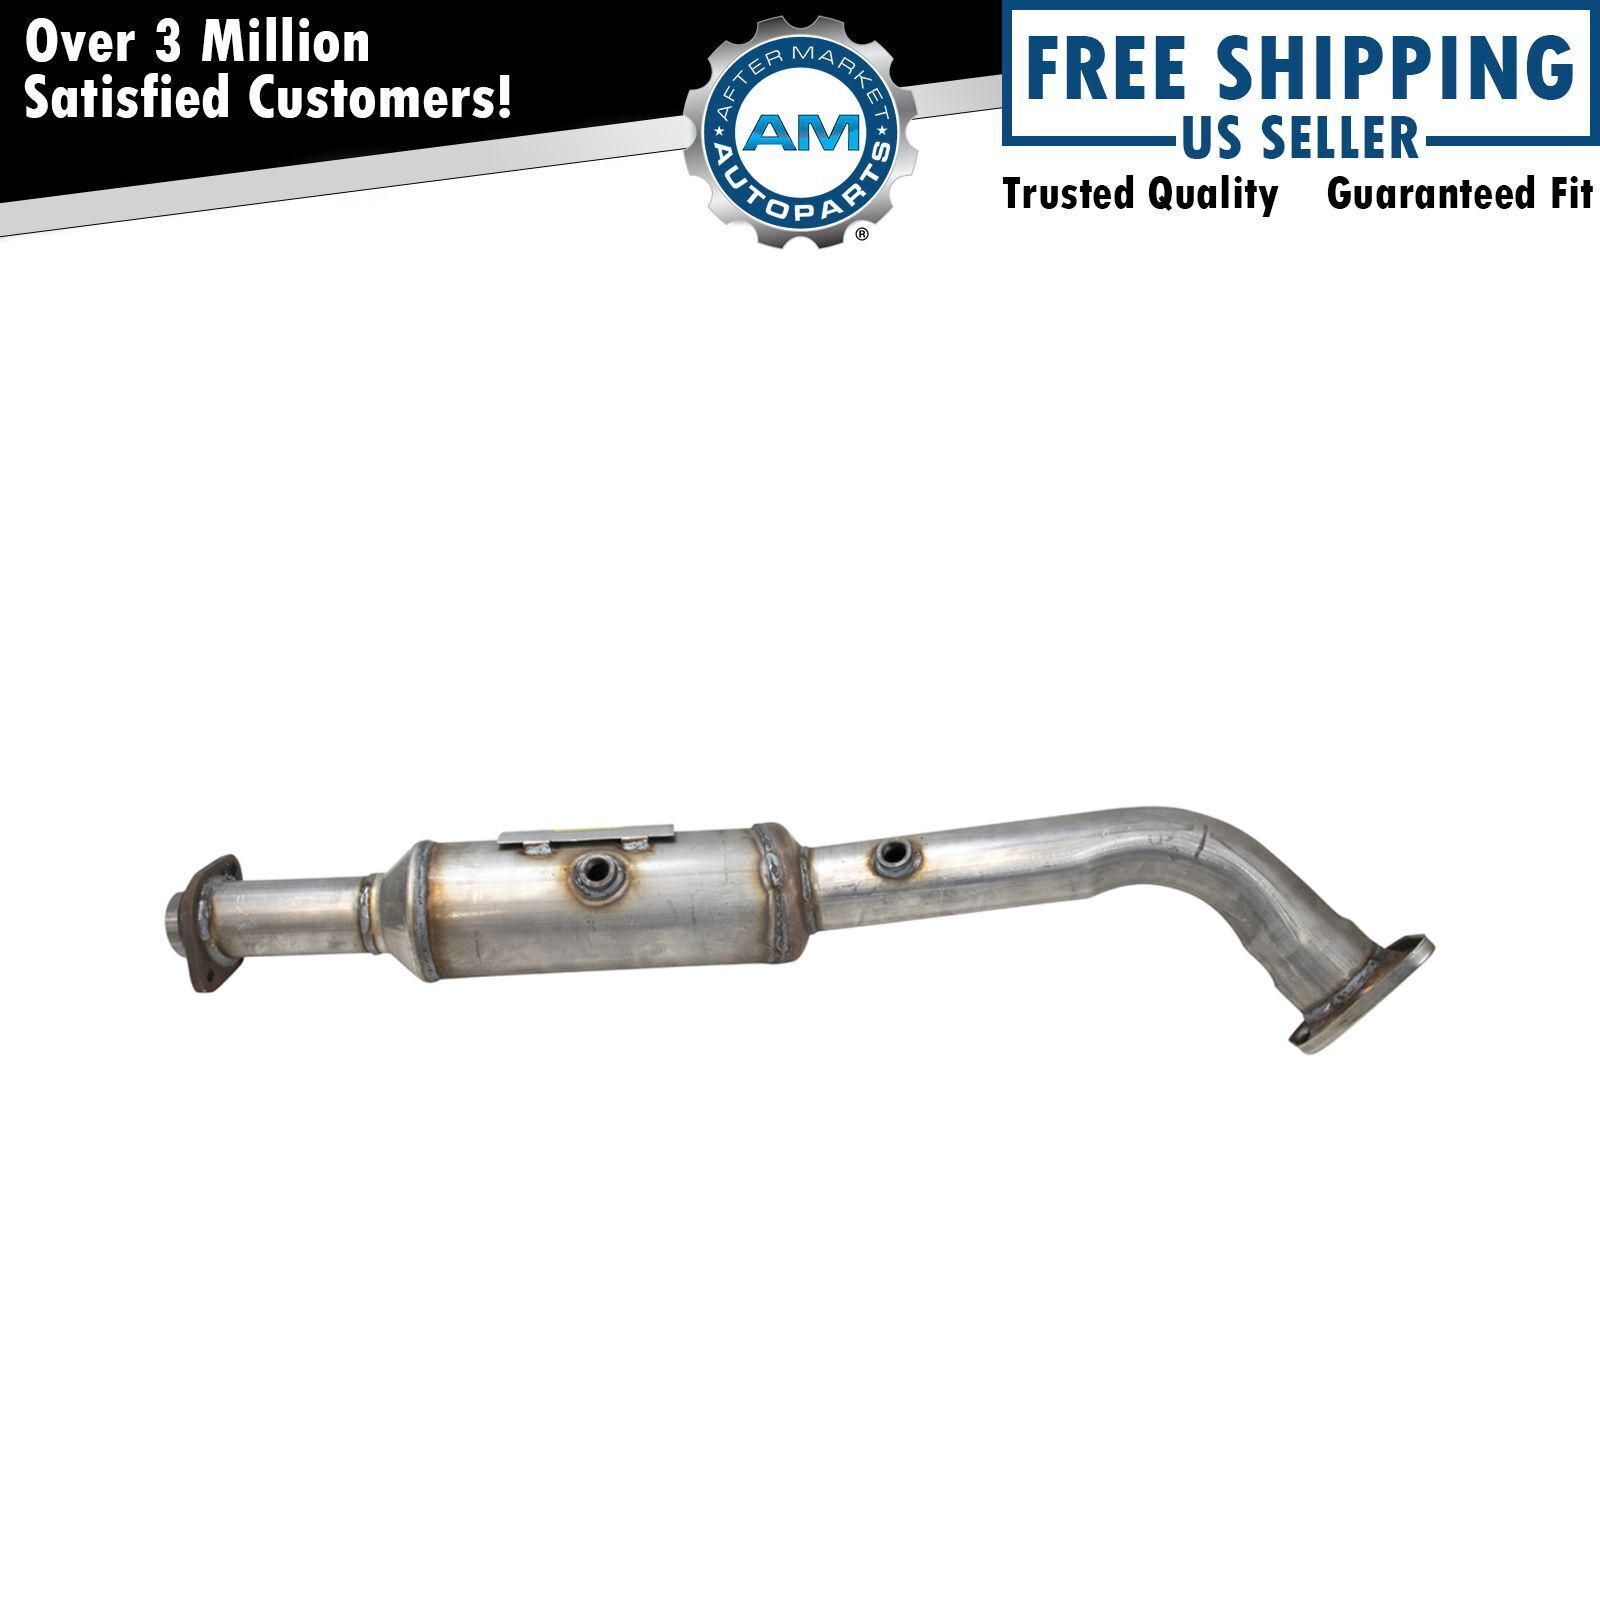 Rear Engine Exhaust Catalytic Converter Assembly for Honda Element New